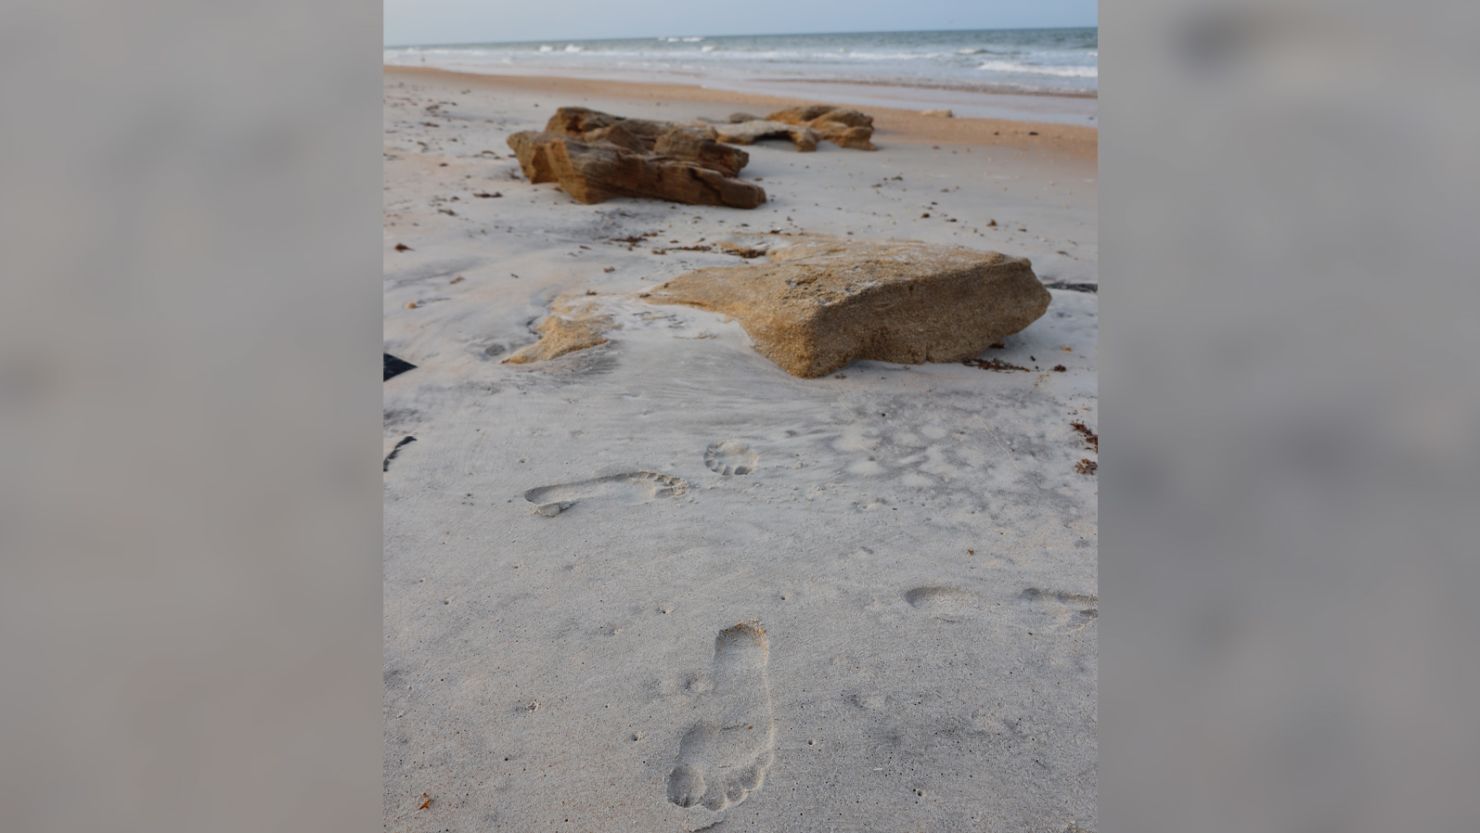 Human DNA was recovered from a footprint on a Florida beach.